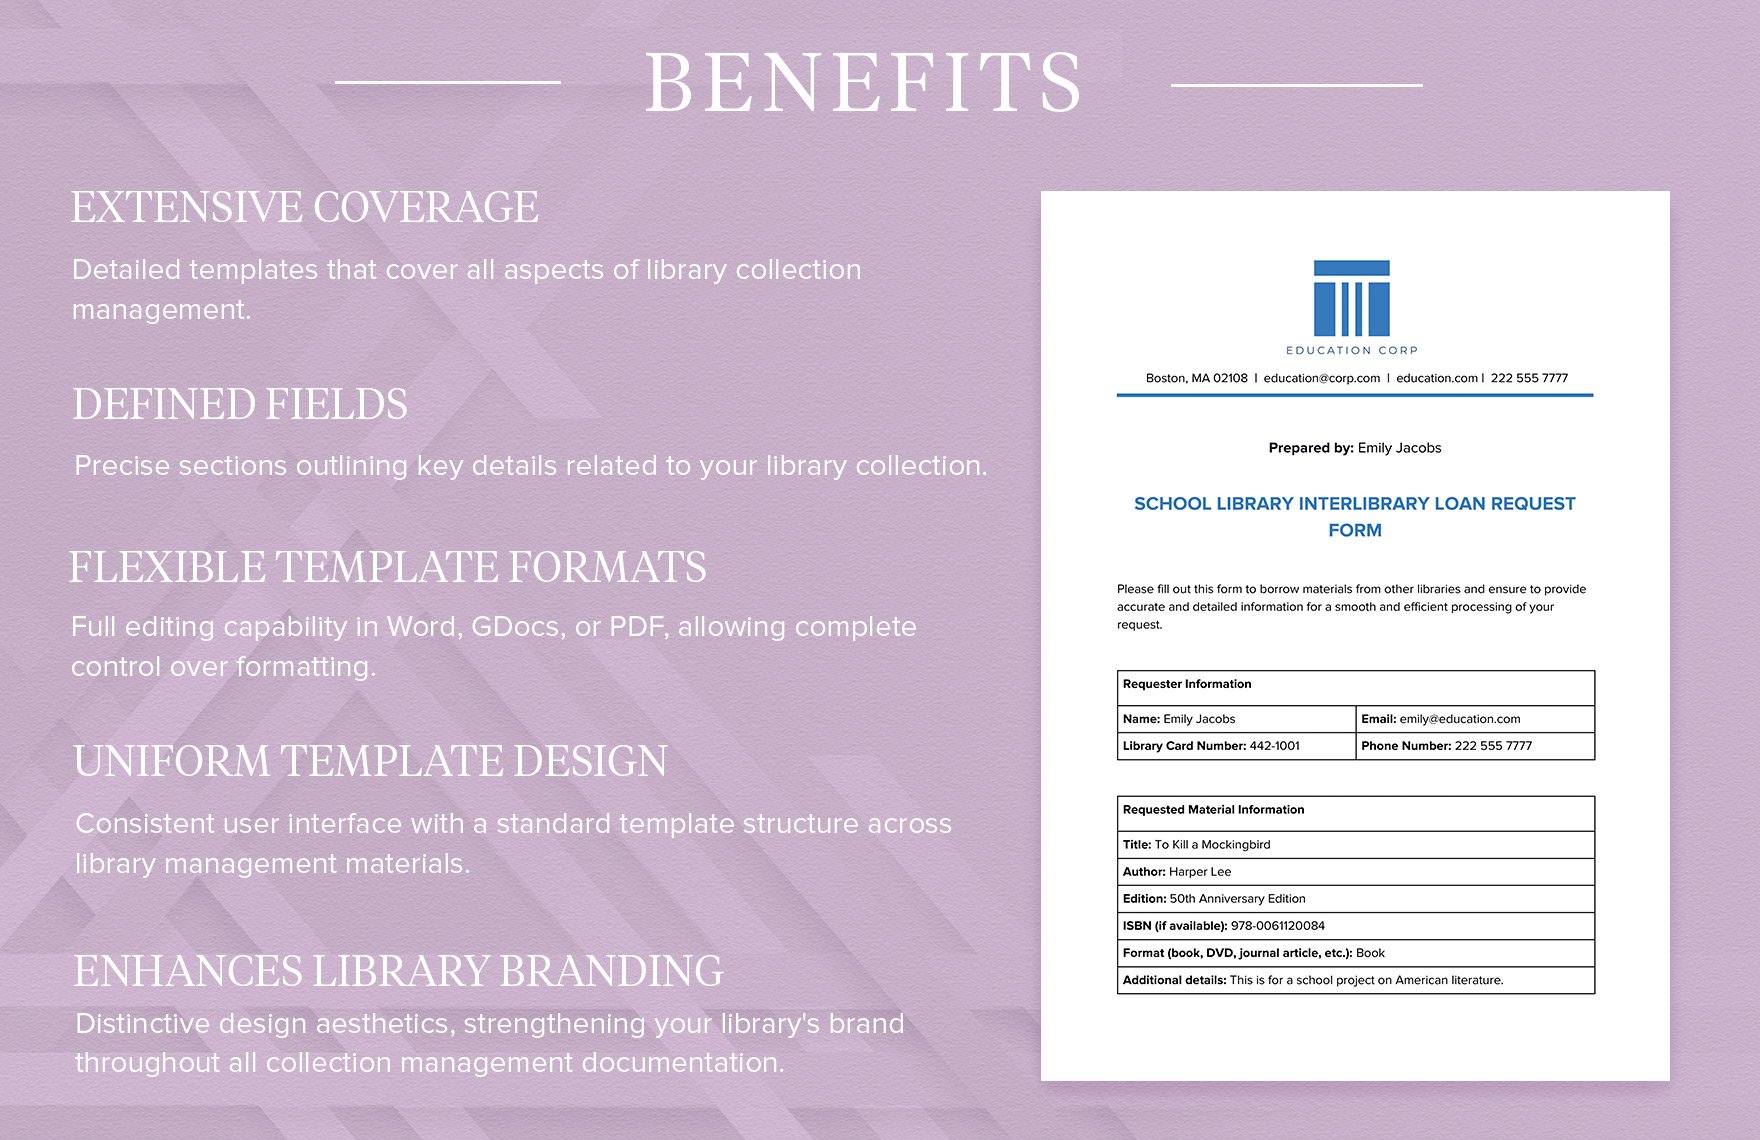 School Library Interlibrary Loan Request Form Template